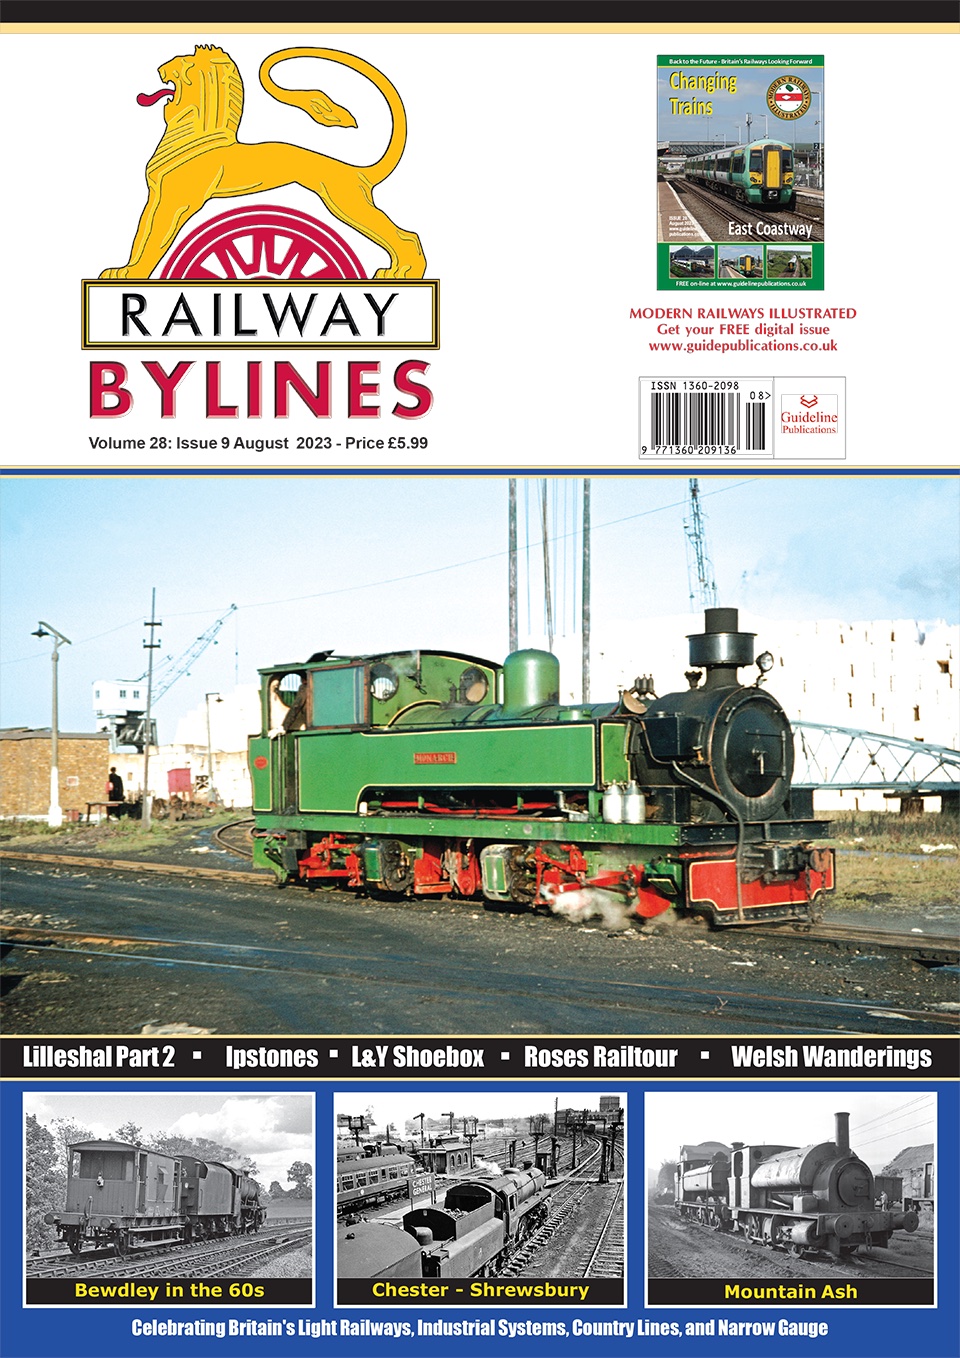 Guideline Publications Ltd Railway Bylines  vol 28 - issue 09 August 23 